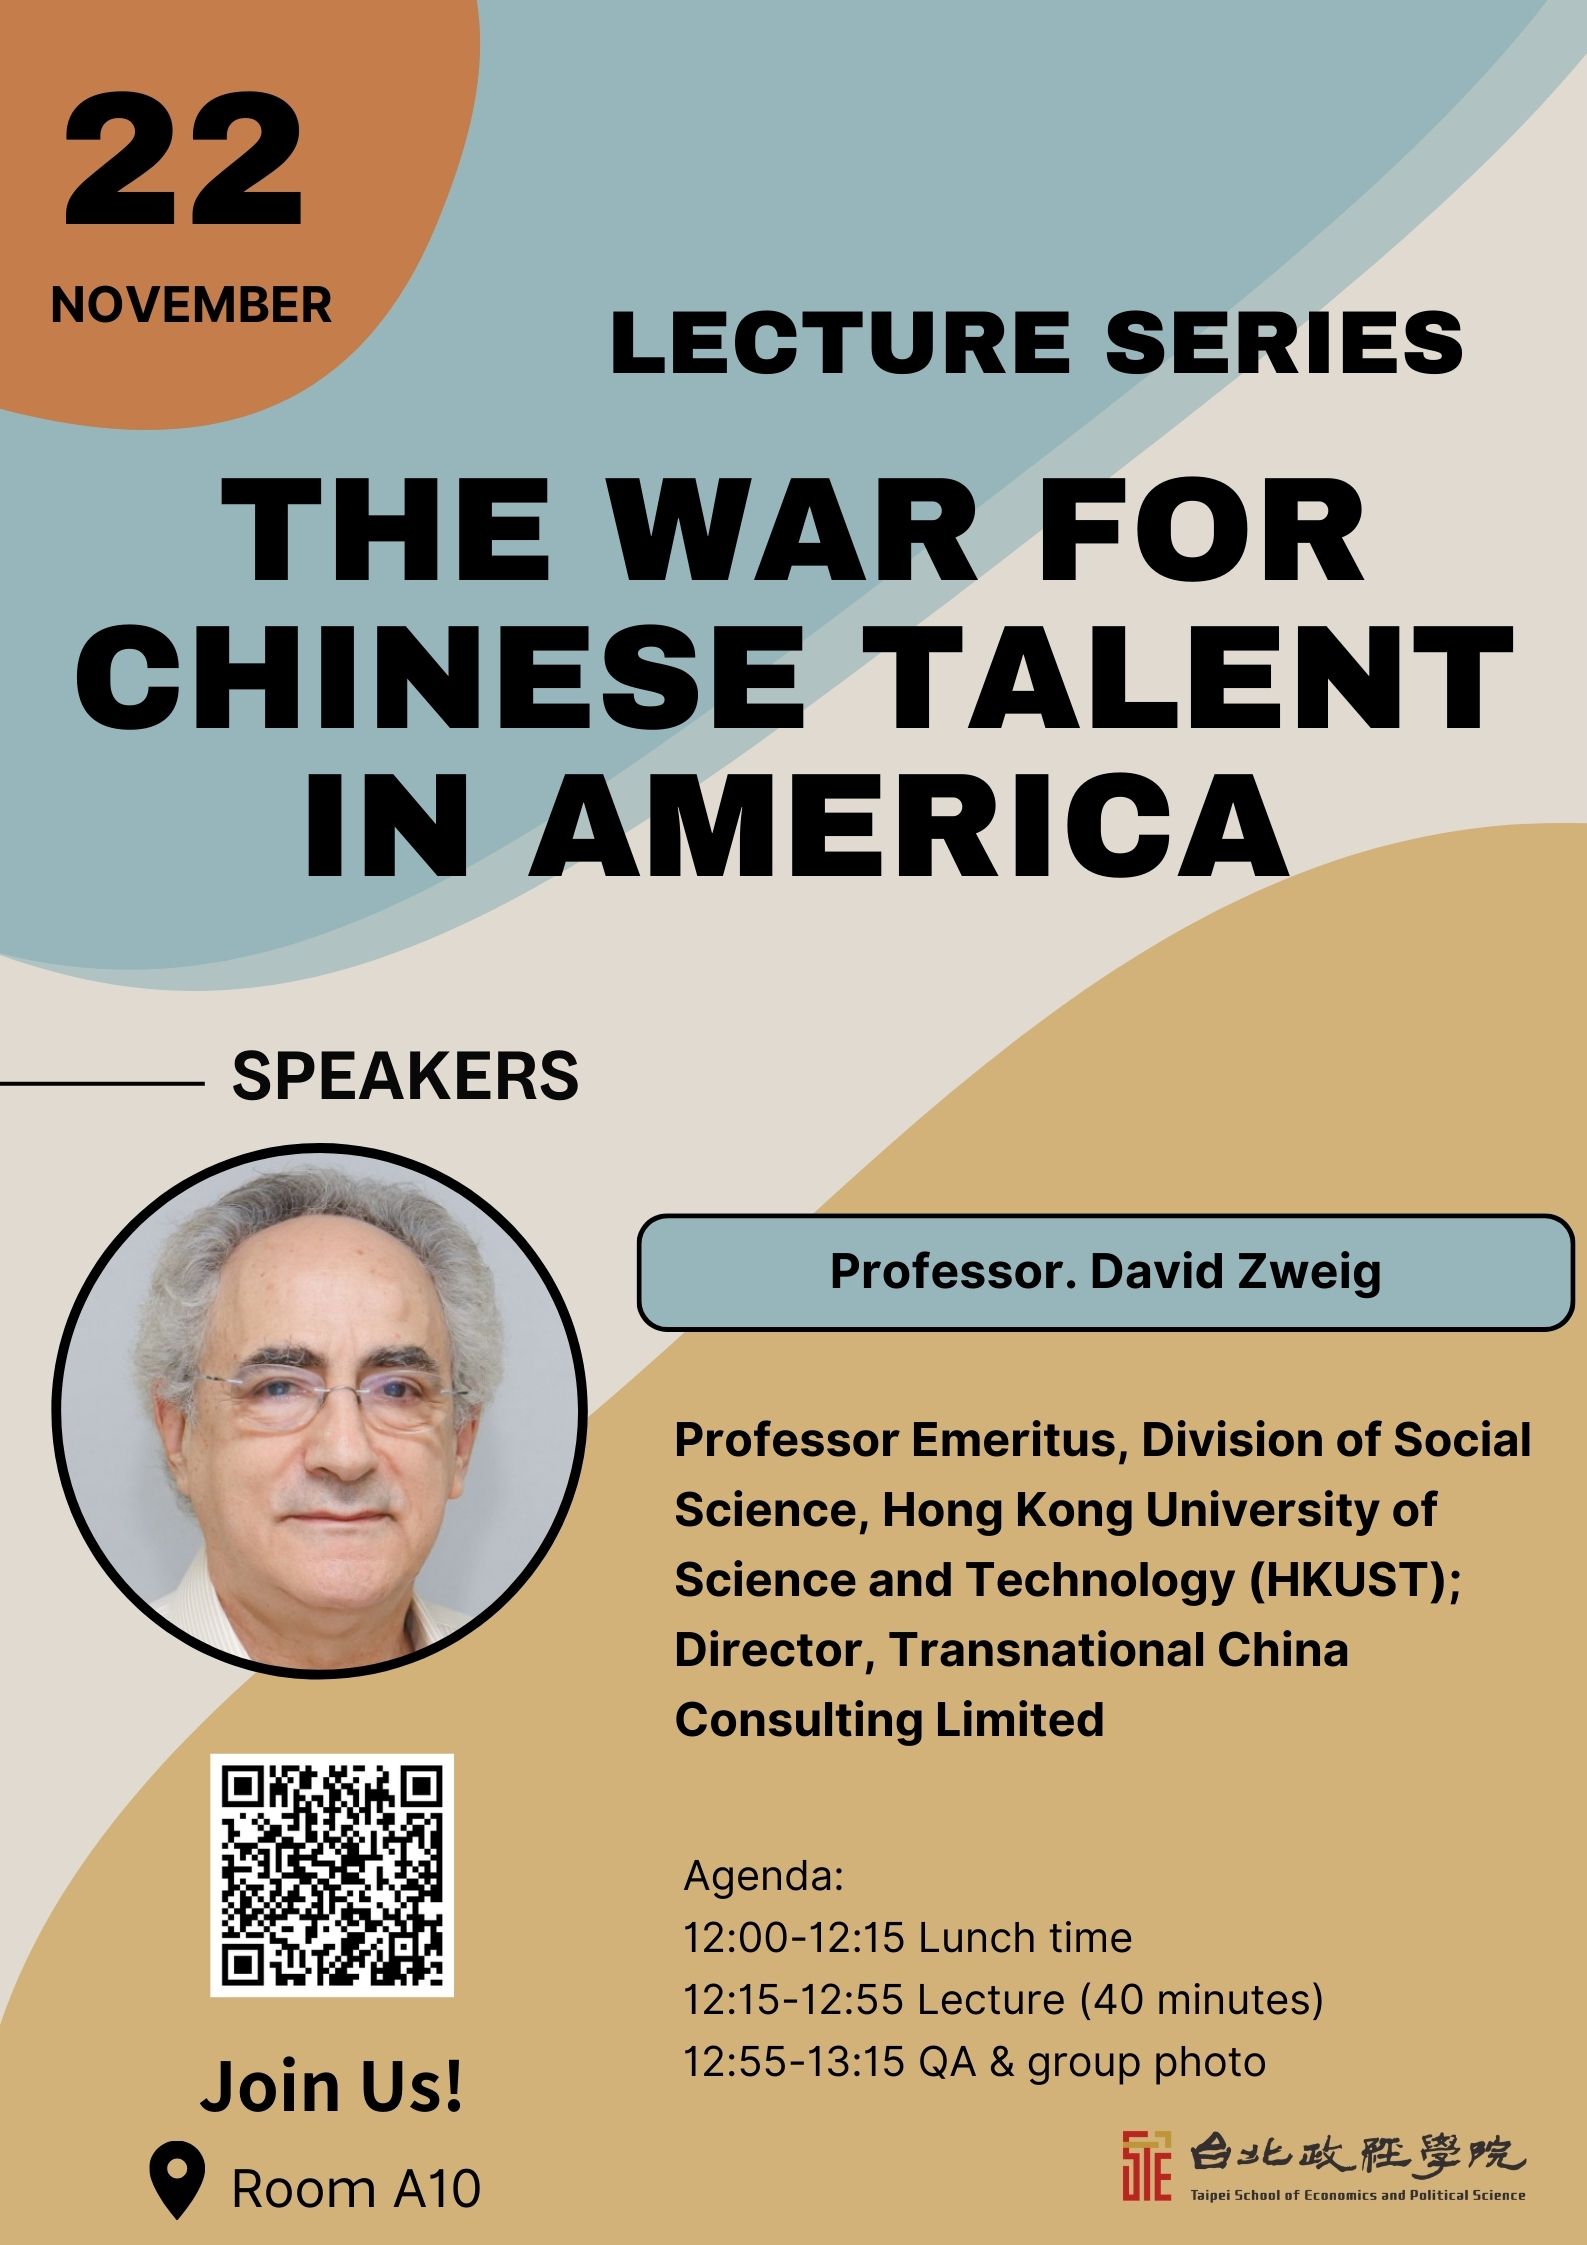 TSE Lecture Series: "The War for Chinese Talent in America"